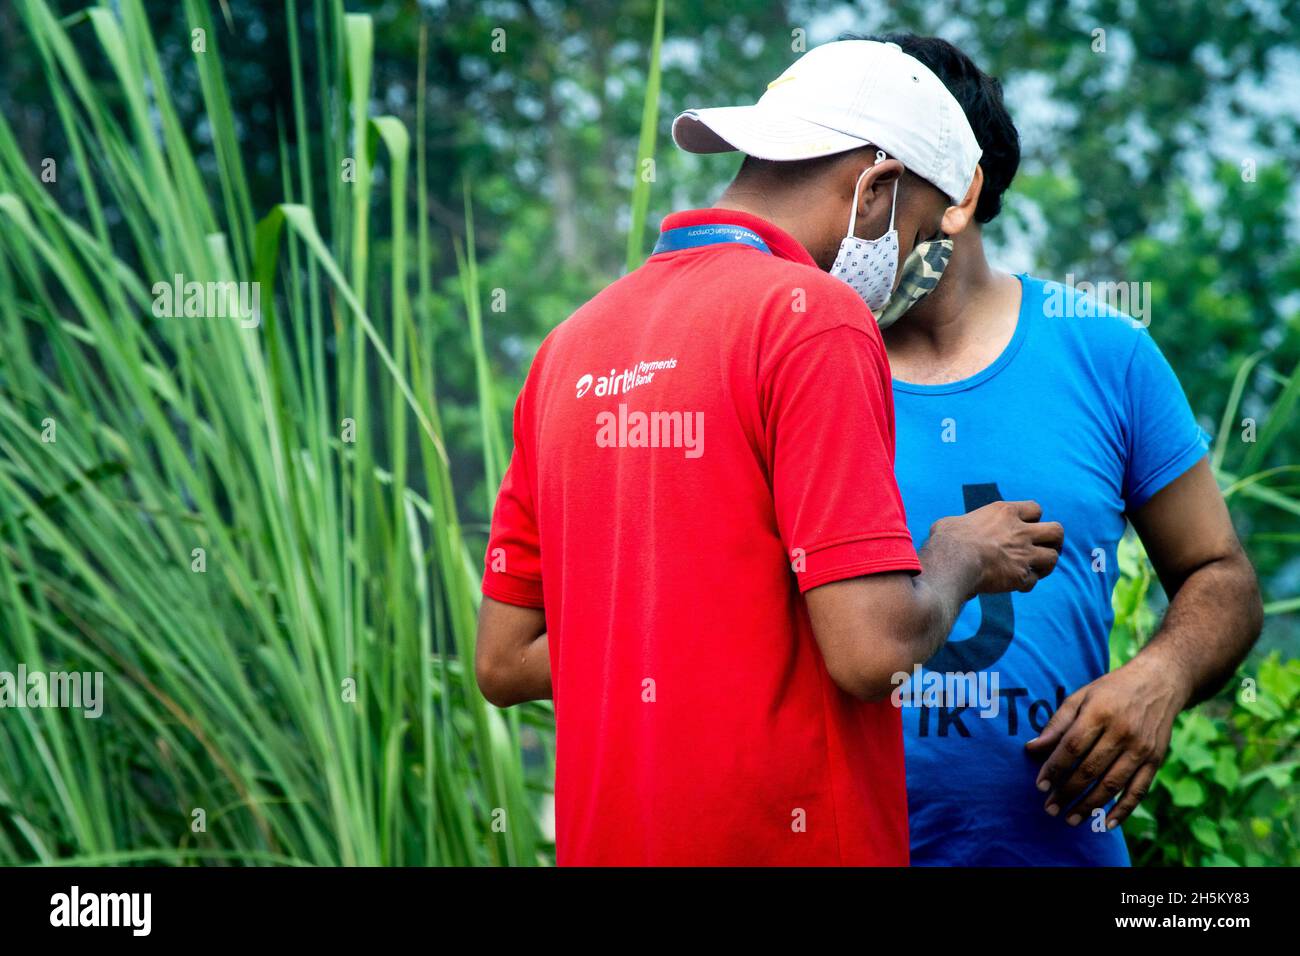 Man wearing the red shirt of airtel payments bank the digital wallet and  cashless solution, with another person wearing a tik tok shirt Stock Photo  - Alamy